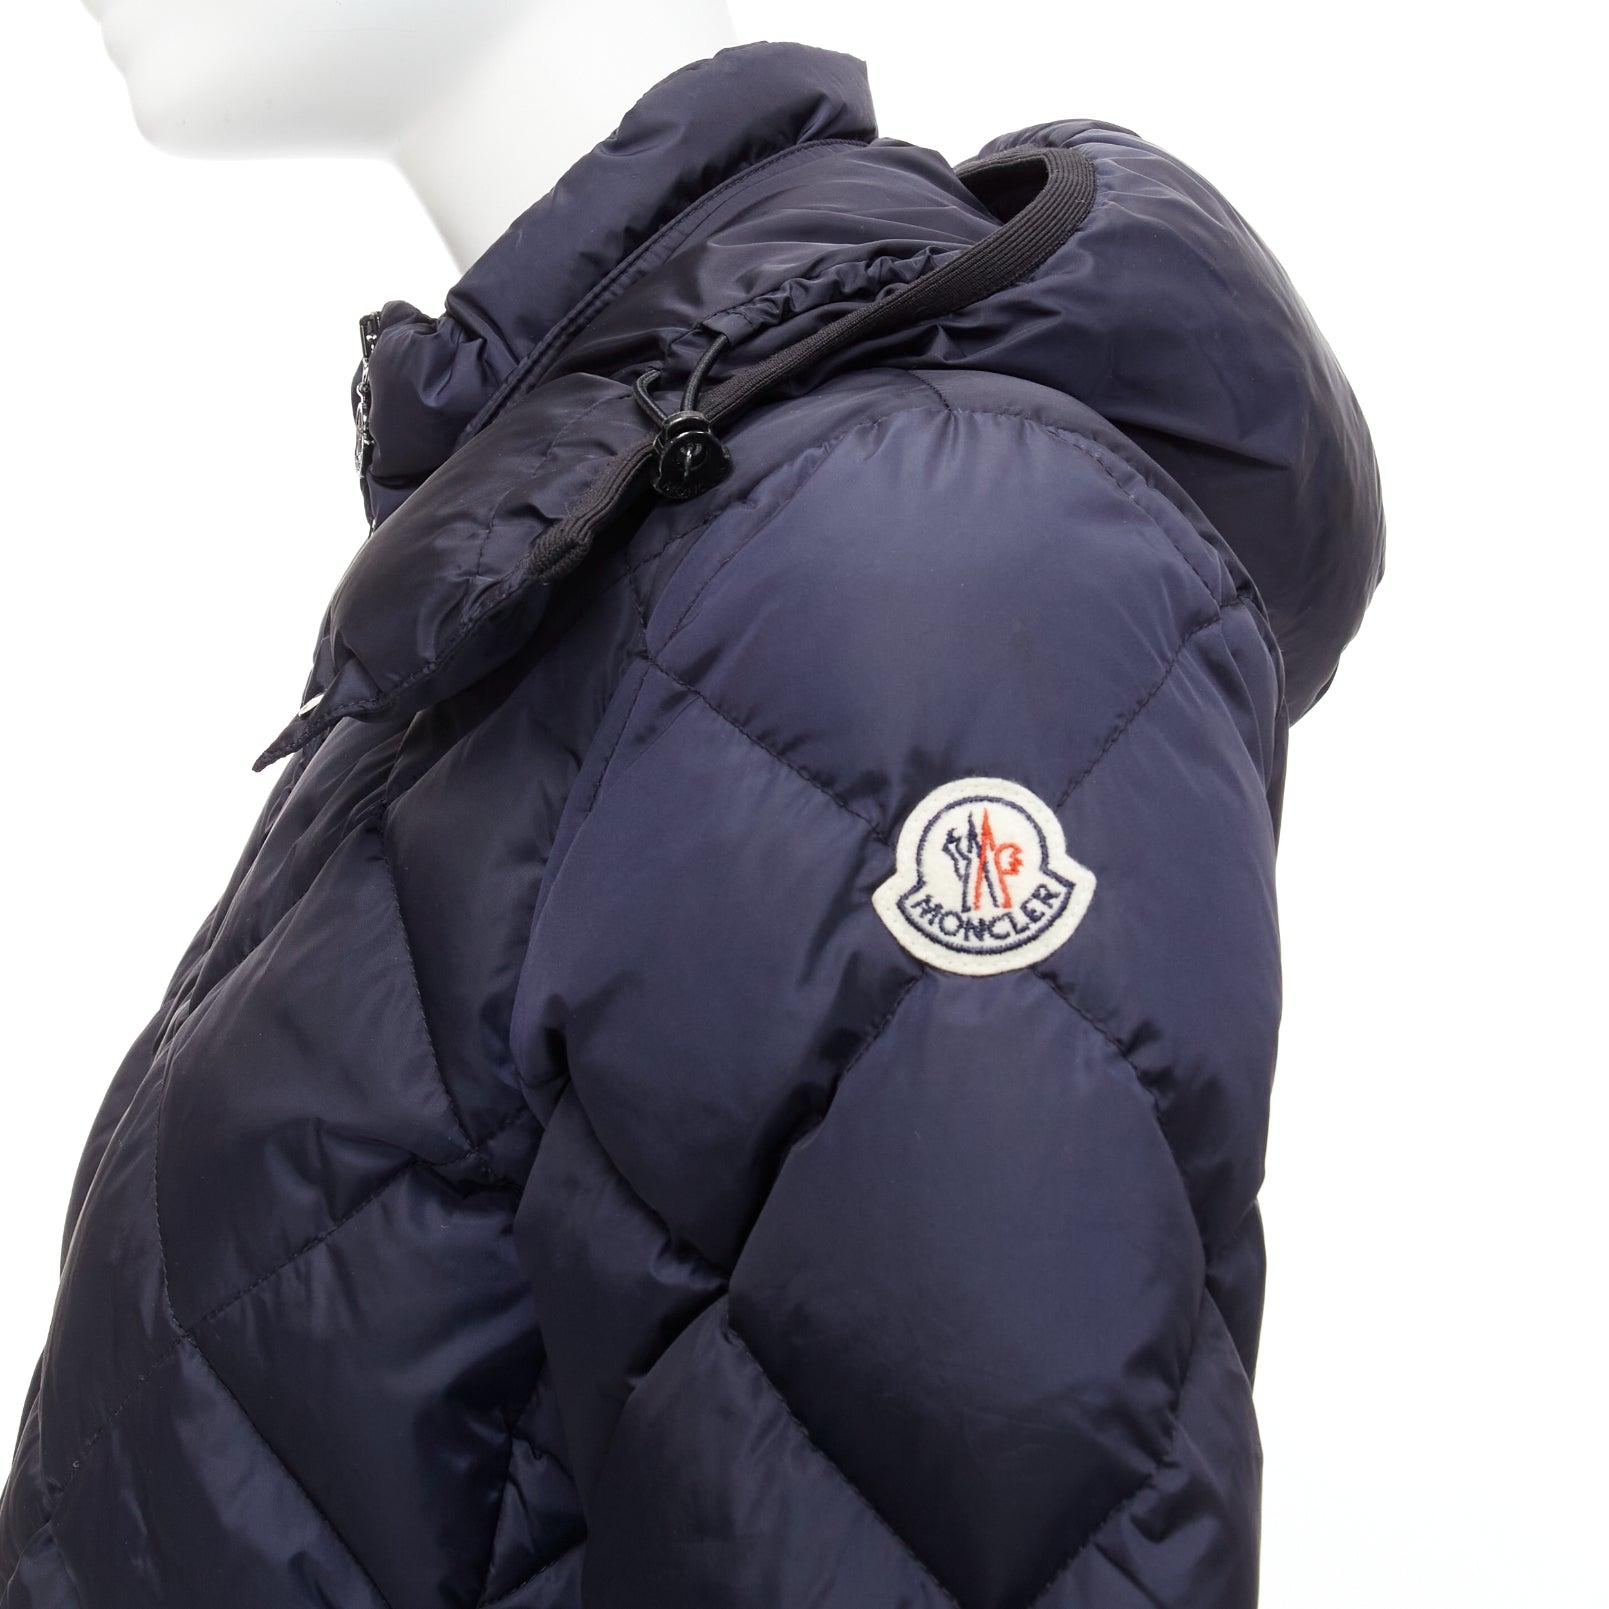 MONCLER Norme Afnor G32-003 navy goose down slim waist puffer jacket Sz 0 S
Reference: JACG/A00091
Brand: Moncler
Model: Norme Afnor G32-003
Material: Fabric
Color: Navy
Pattern: Solid
Closure: Zip
Lining: Black Goose Down
Made in: